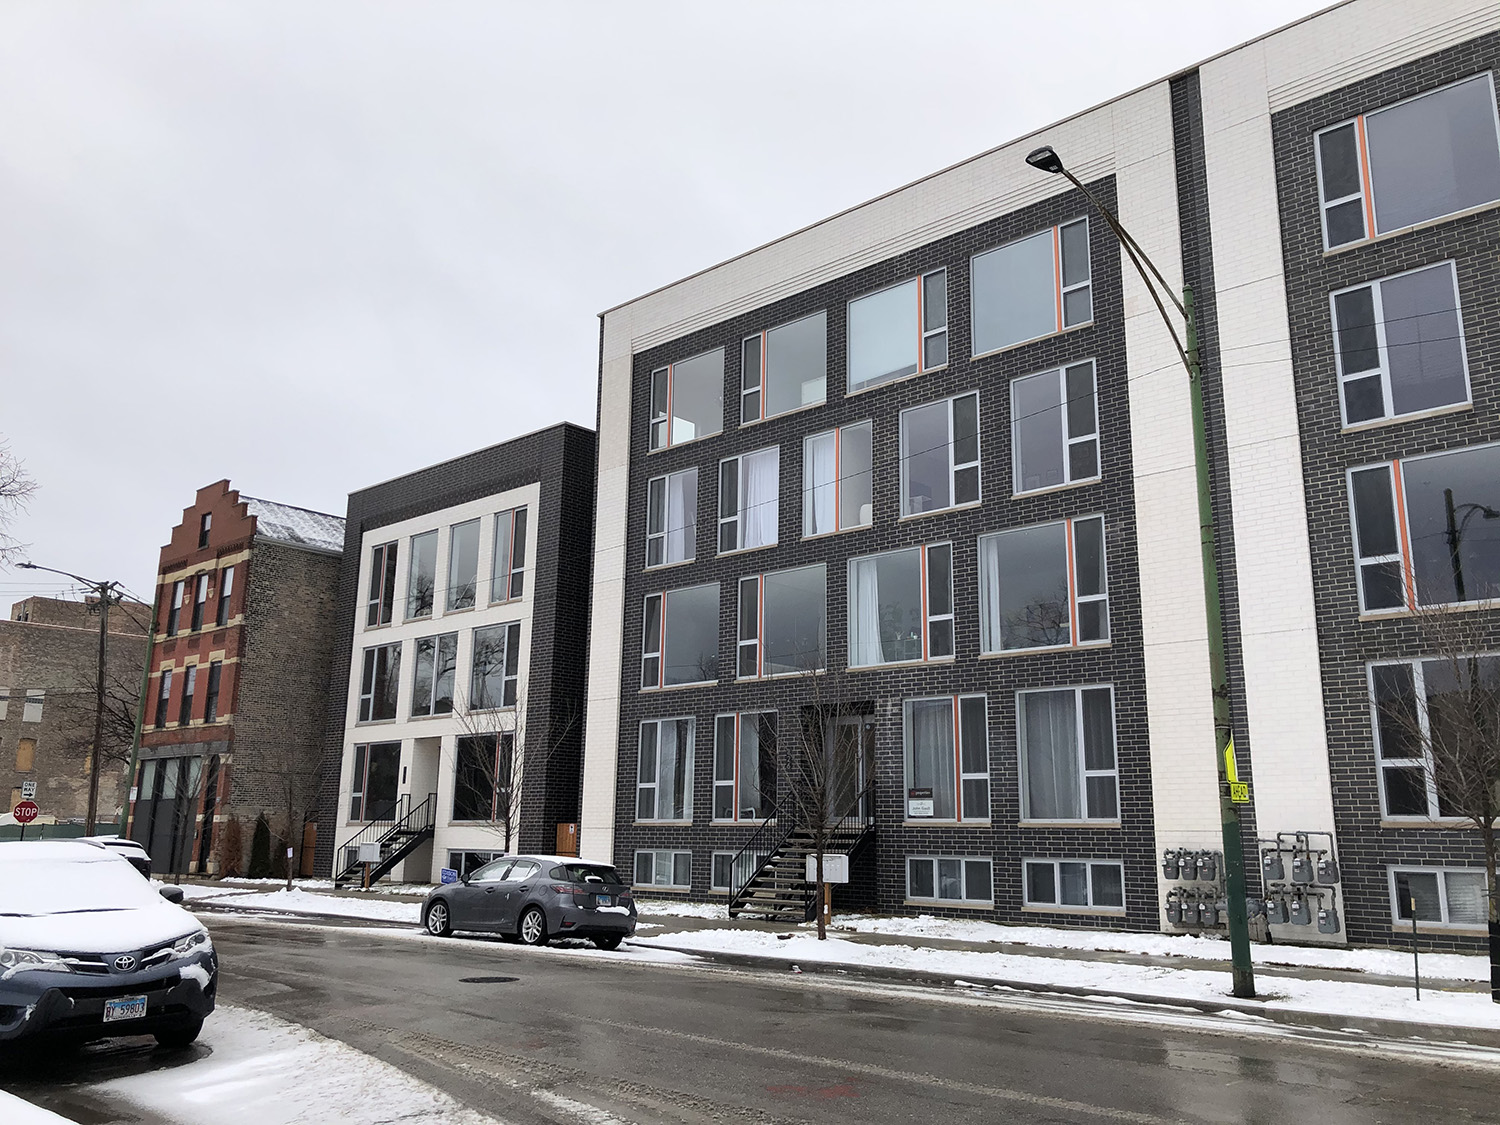 826 and 832 W Cullerton Street at PLSN Condos. Image by Lukas Kugler